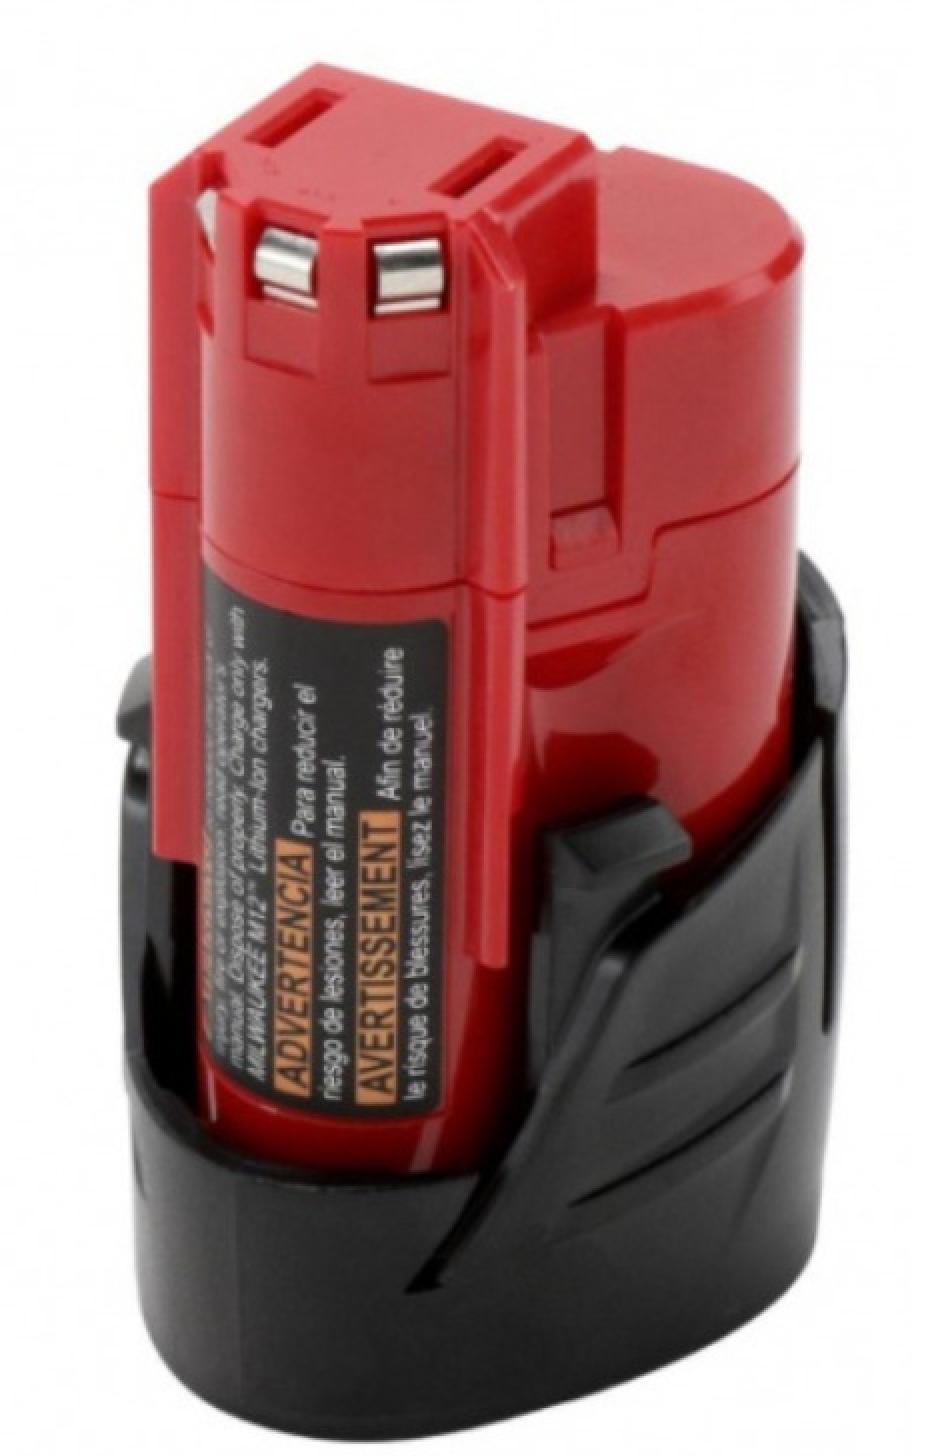 Milwaukee M12 REDLITHIUM Compact Battery Two Pack